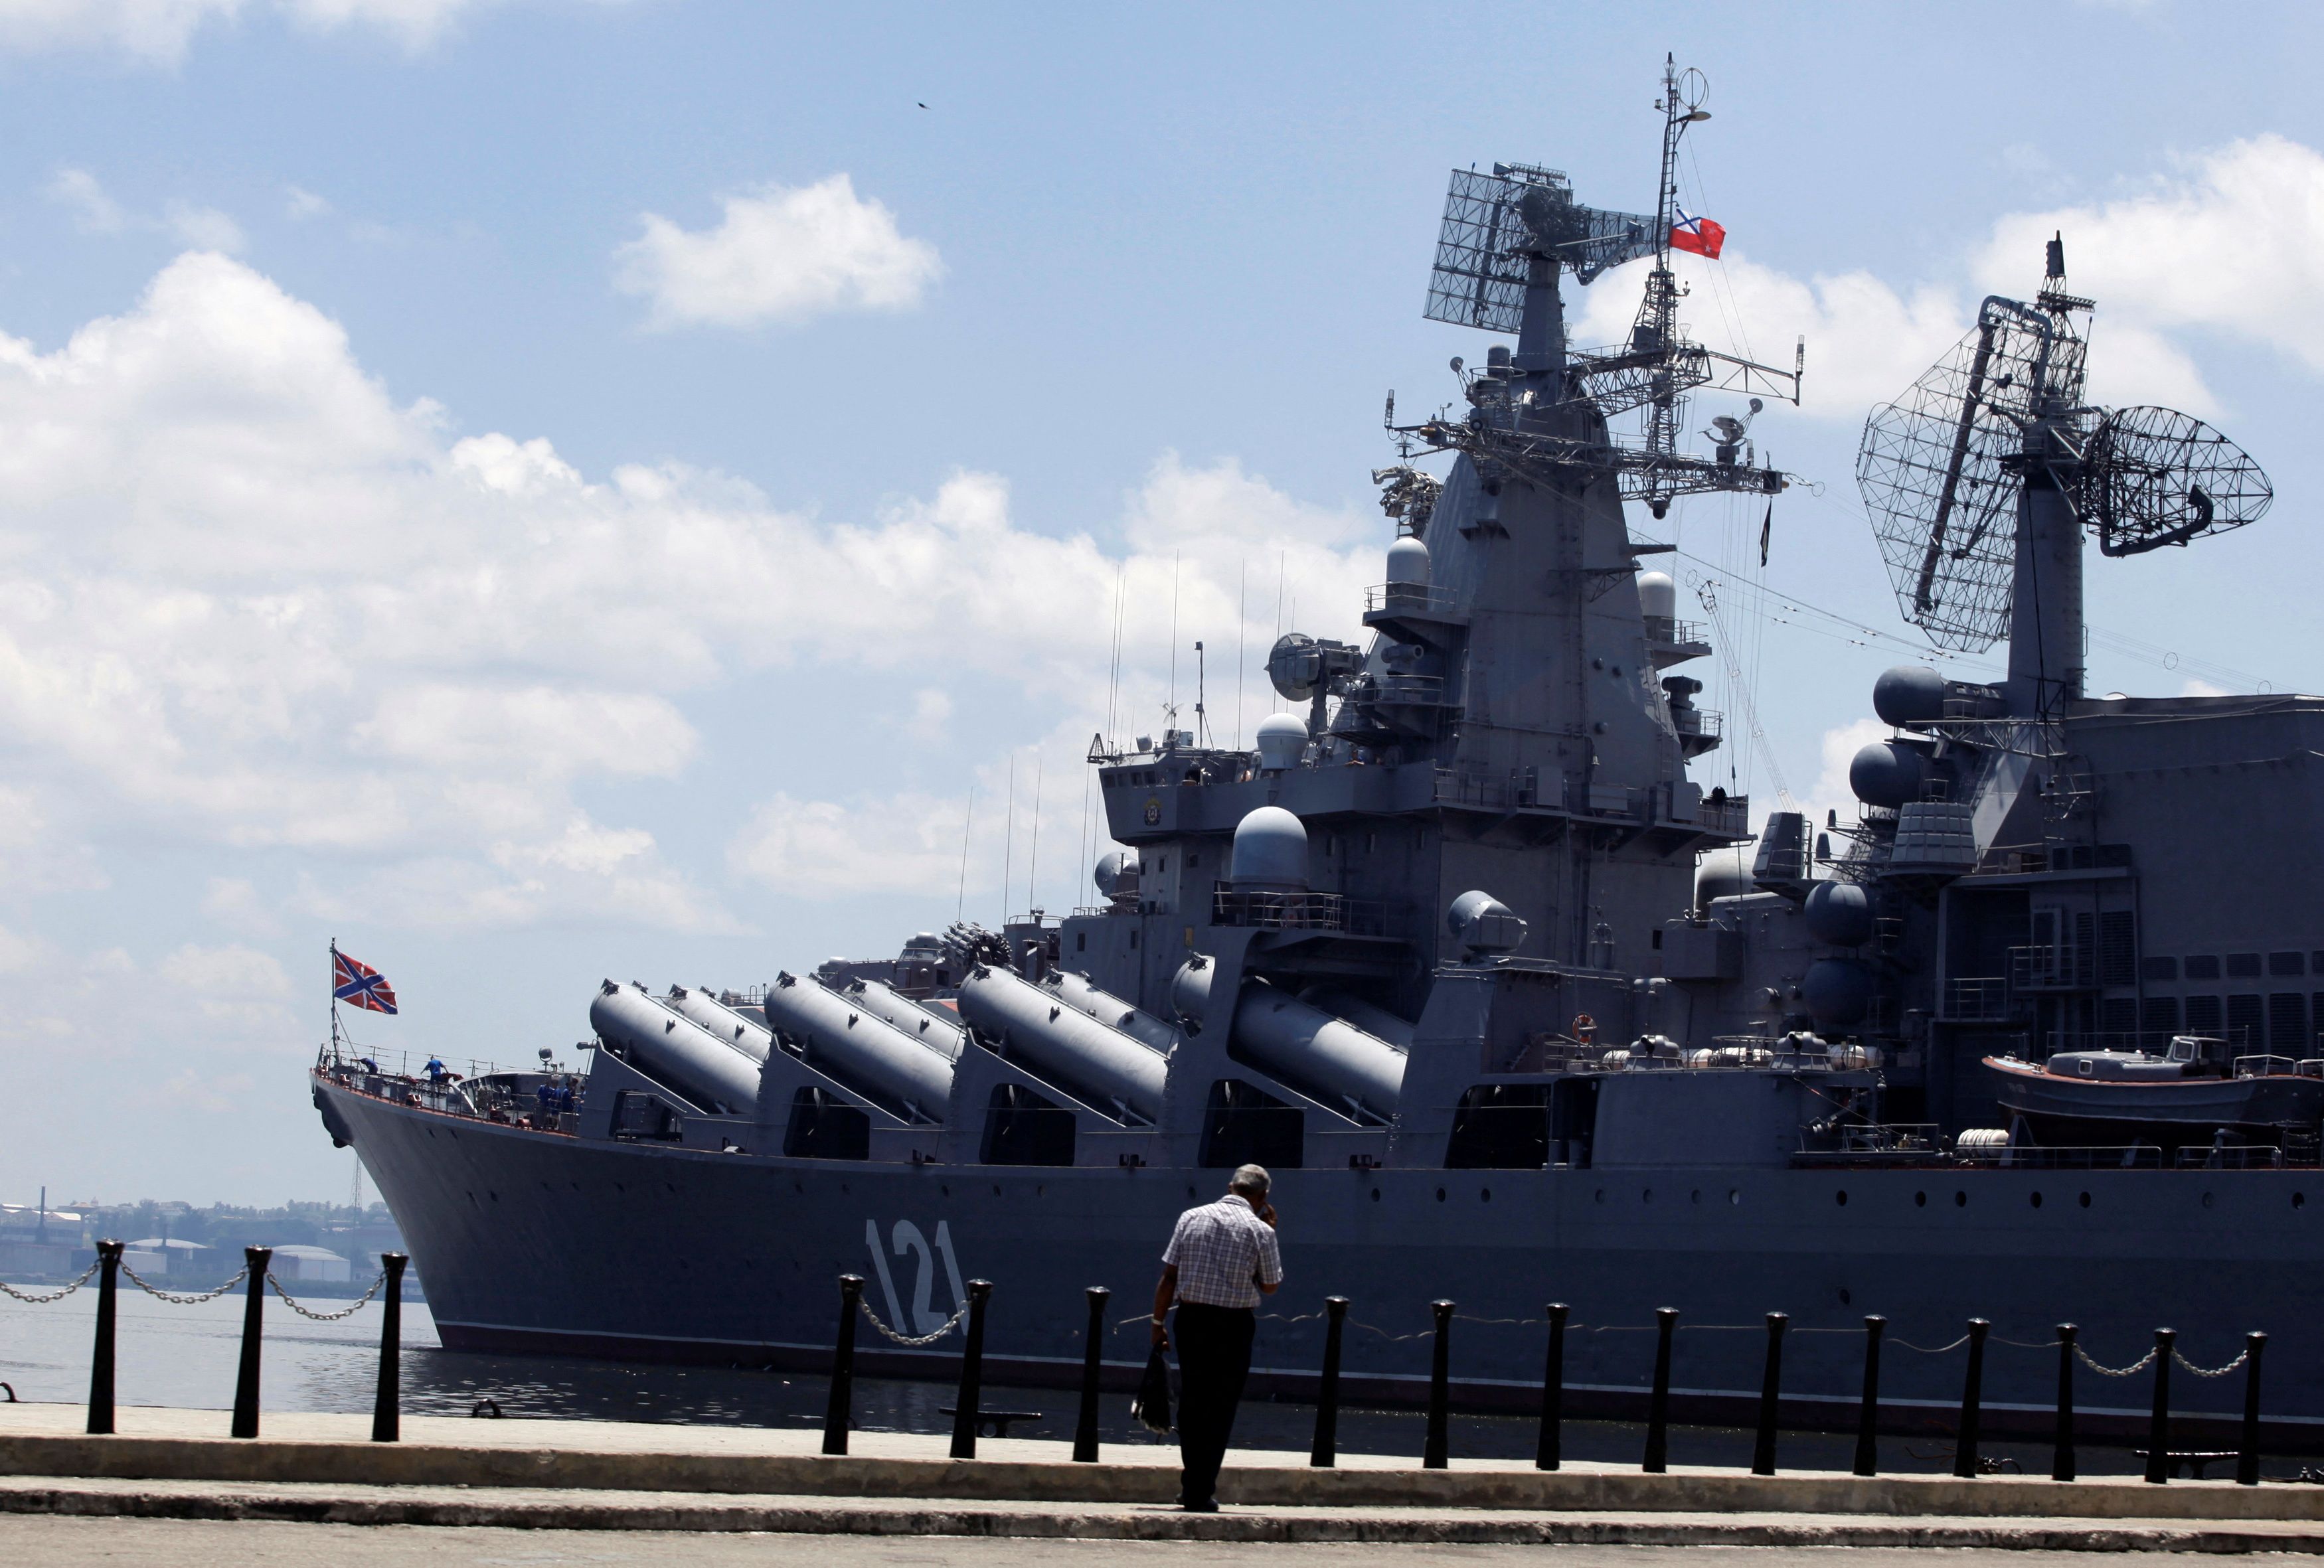 A man walks beside the Russian Moskva Guided Missile Cruiser docked at Havana port